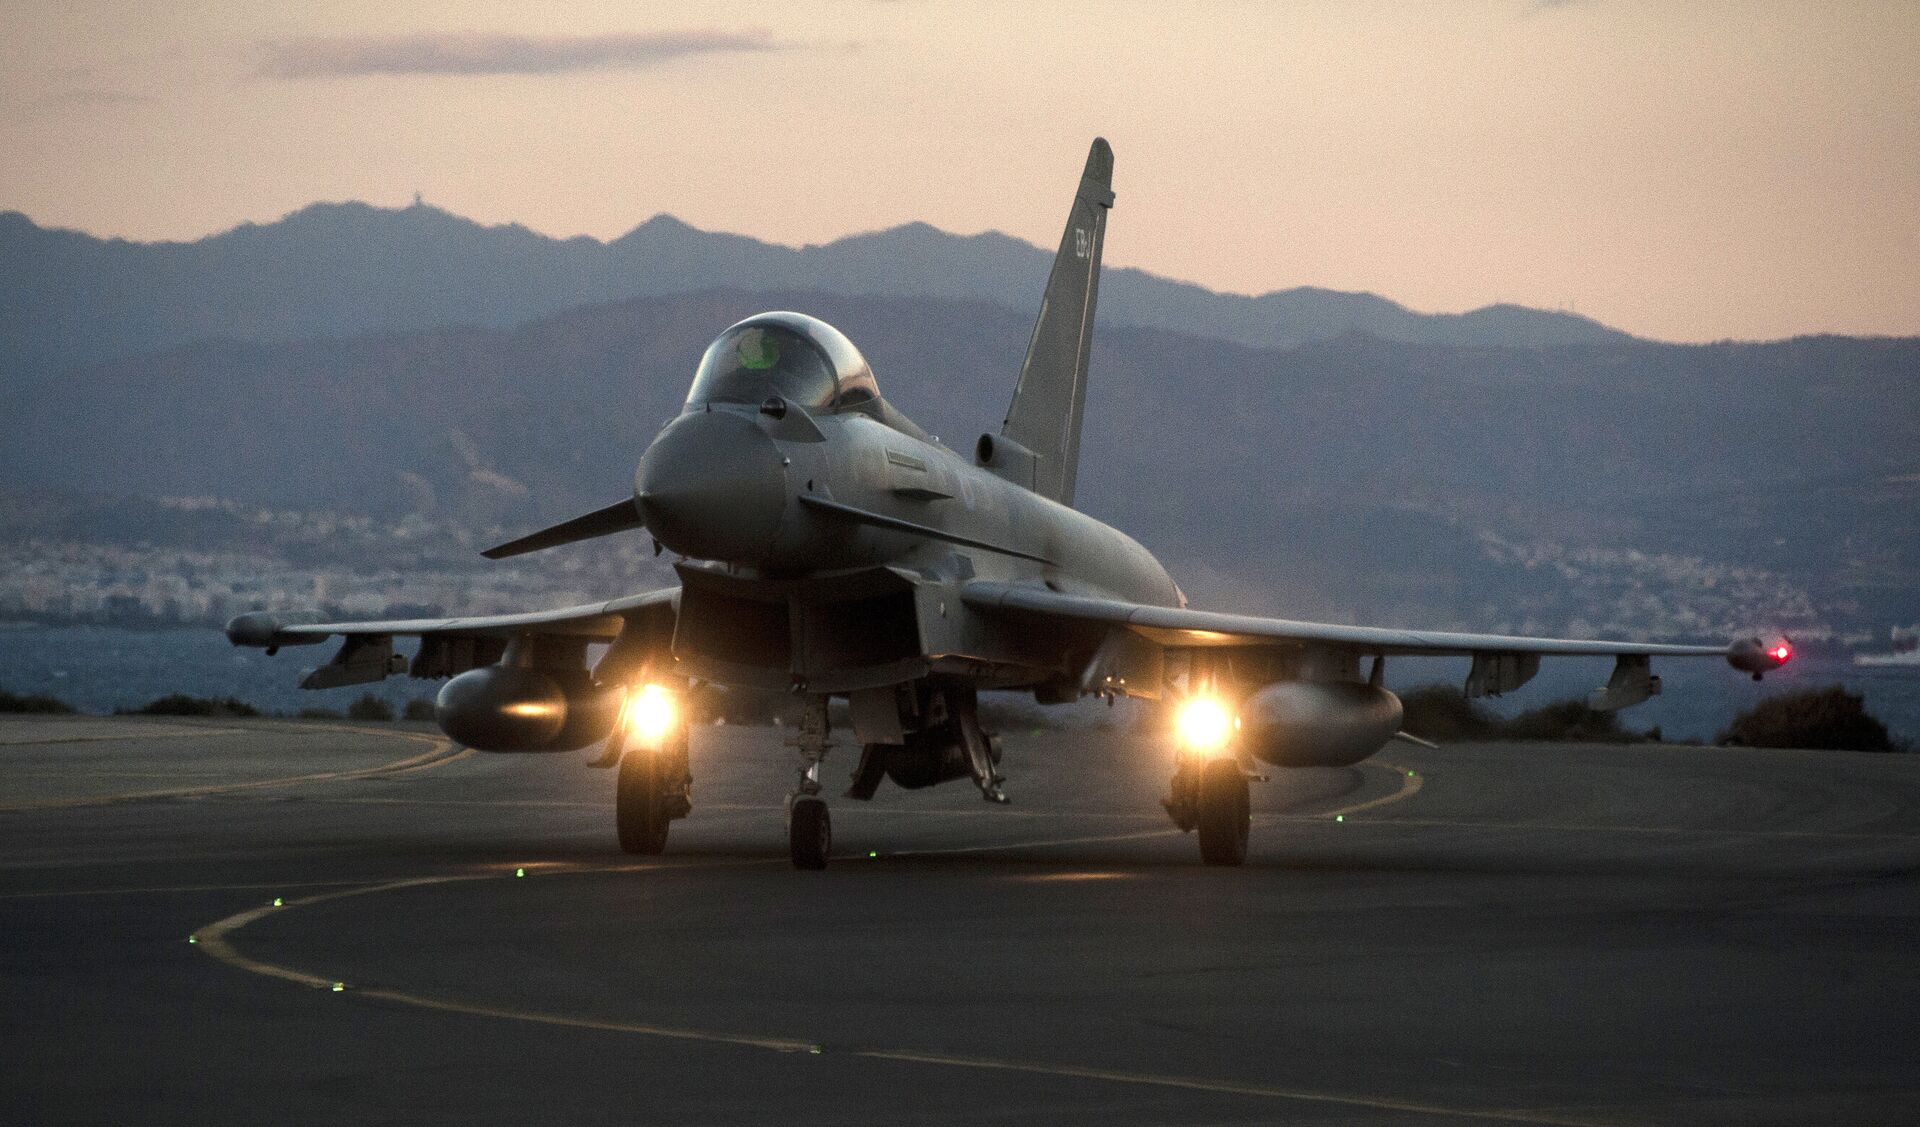 UK RAF Typhoons May Soon Partake in Simulated Attacks on Russian, Chinese Satellites, Reports Say - Sputnik International, 1920, 21.02.2021